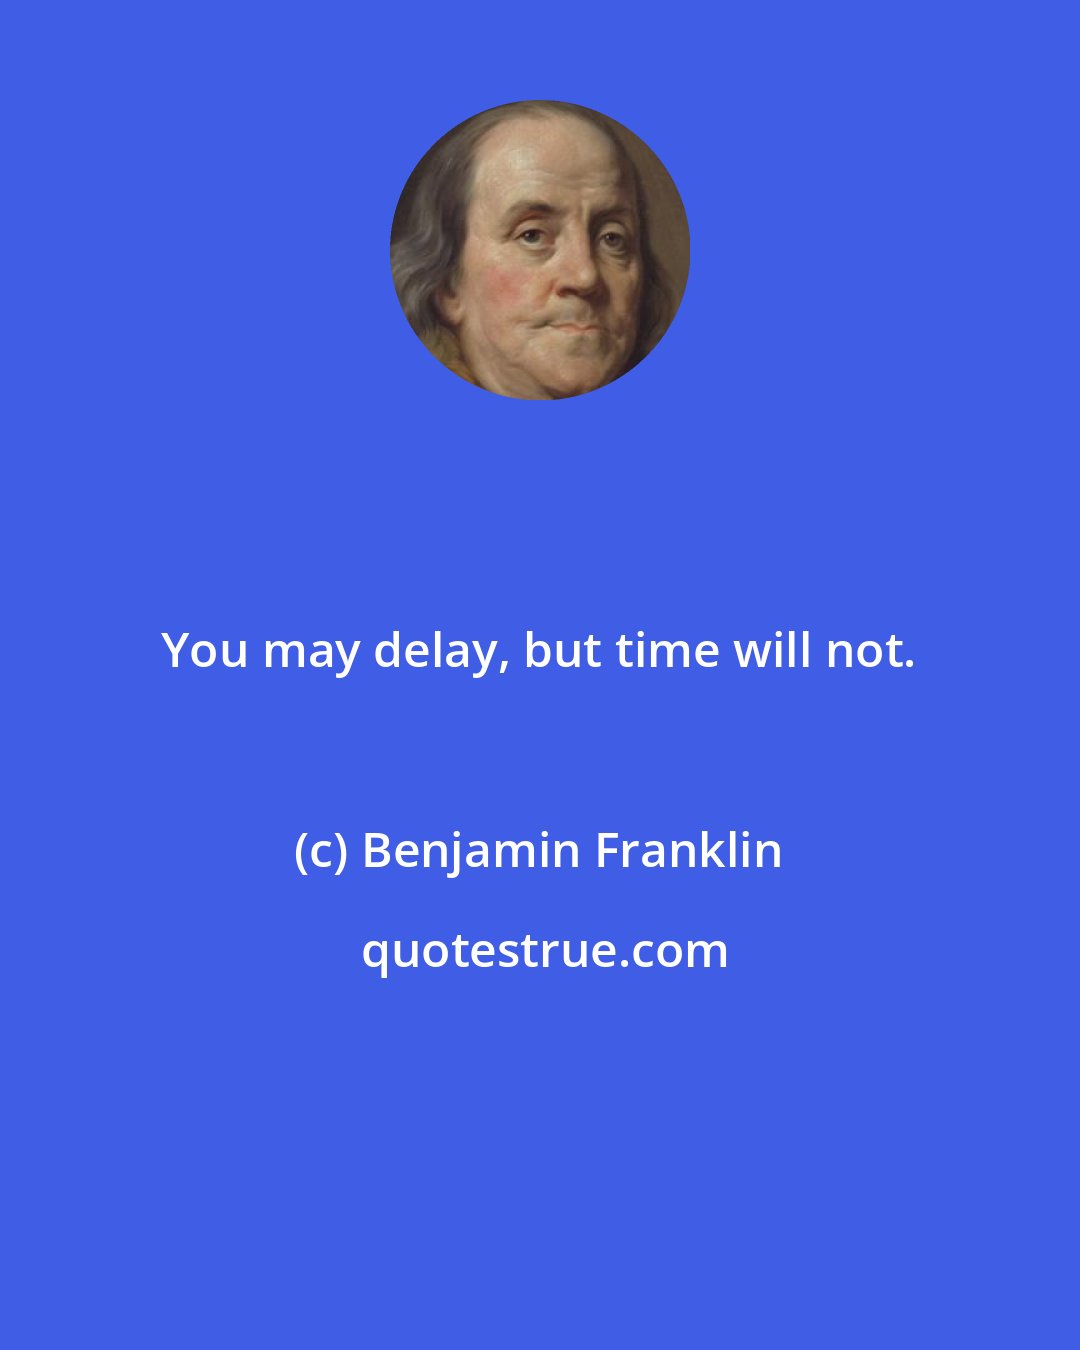 Benjamin Franklin: You may delay, but time will not.